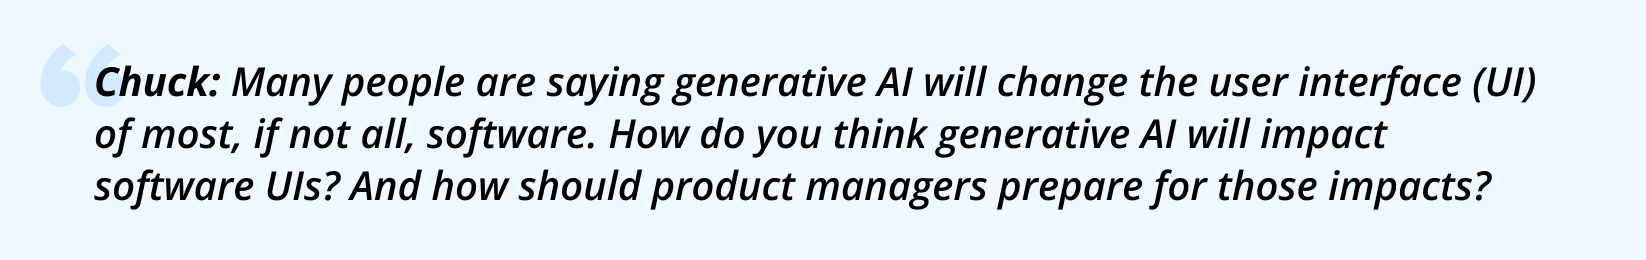 Many people are saying generative AI will change UI